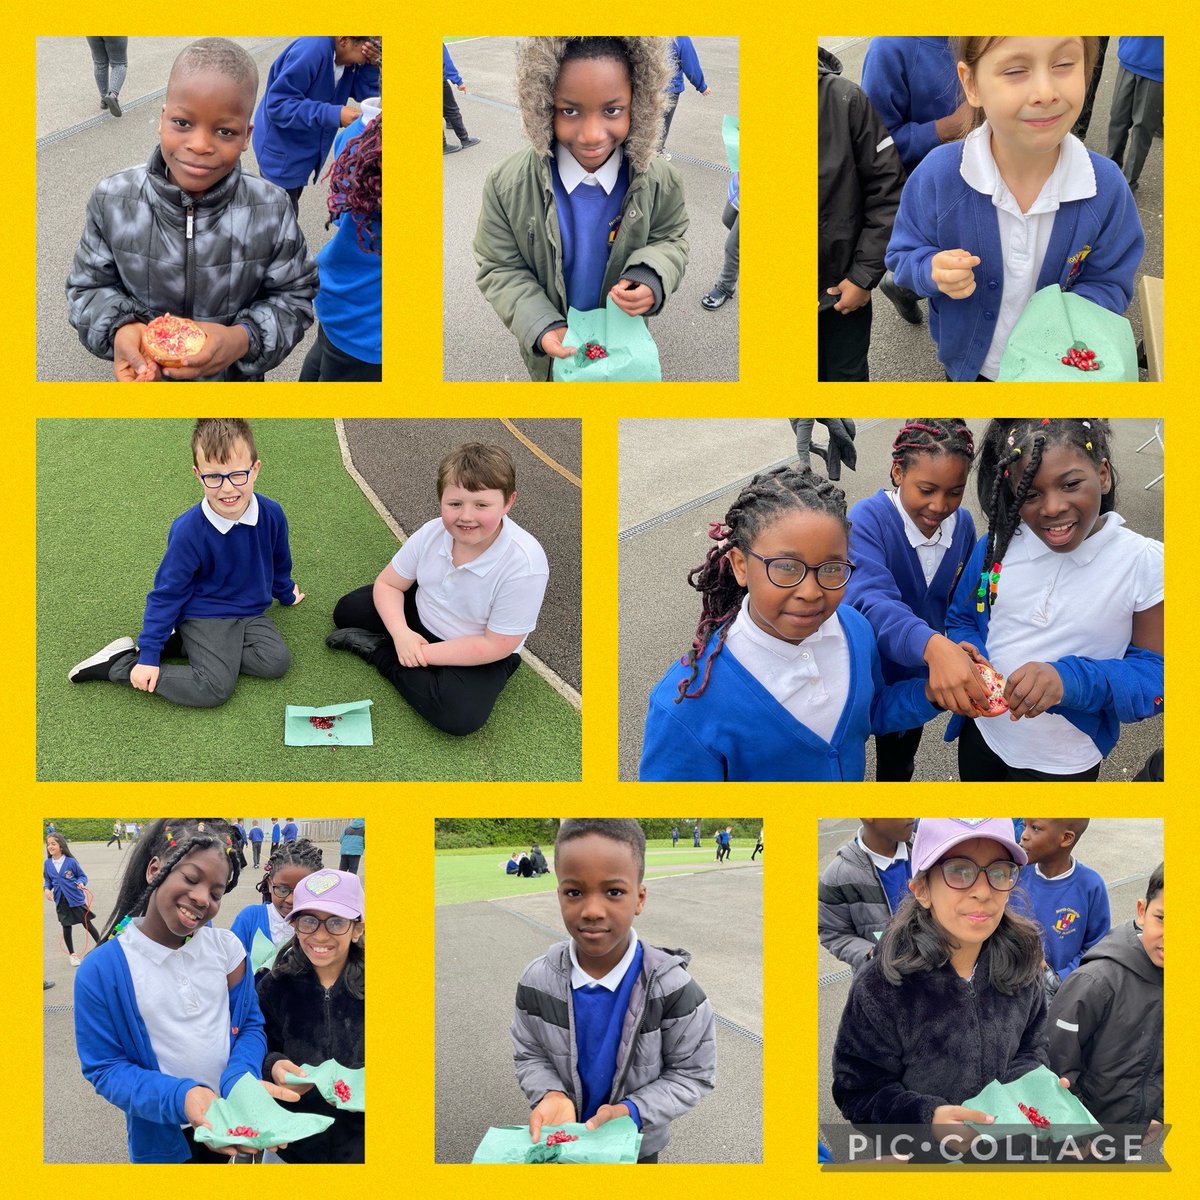 Year 4 have been tasting pomegranates after reading a description about them in our class text ‘The boy at the back of the class’. @OnjaliRauf @CNicholson_Edu